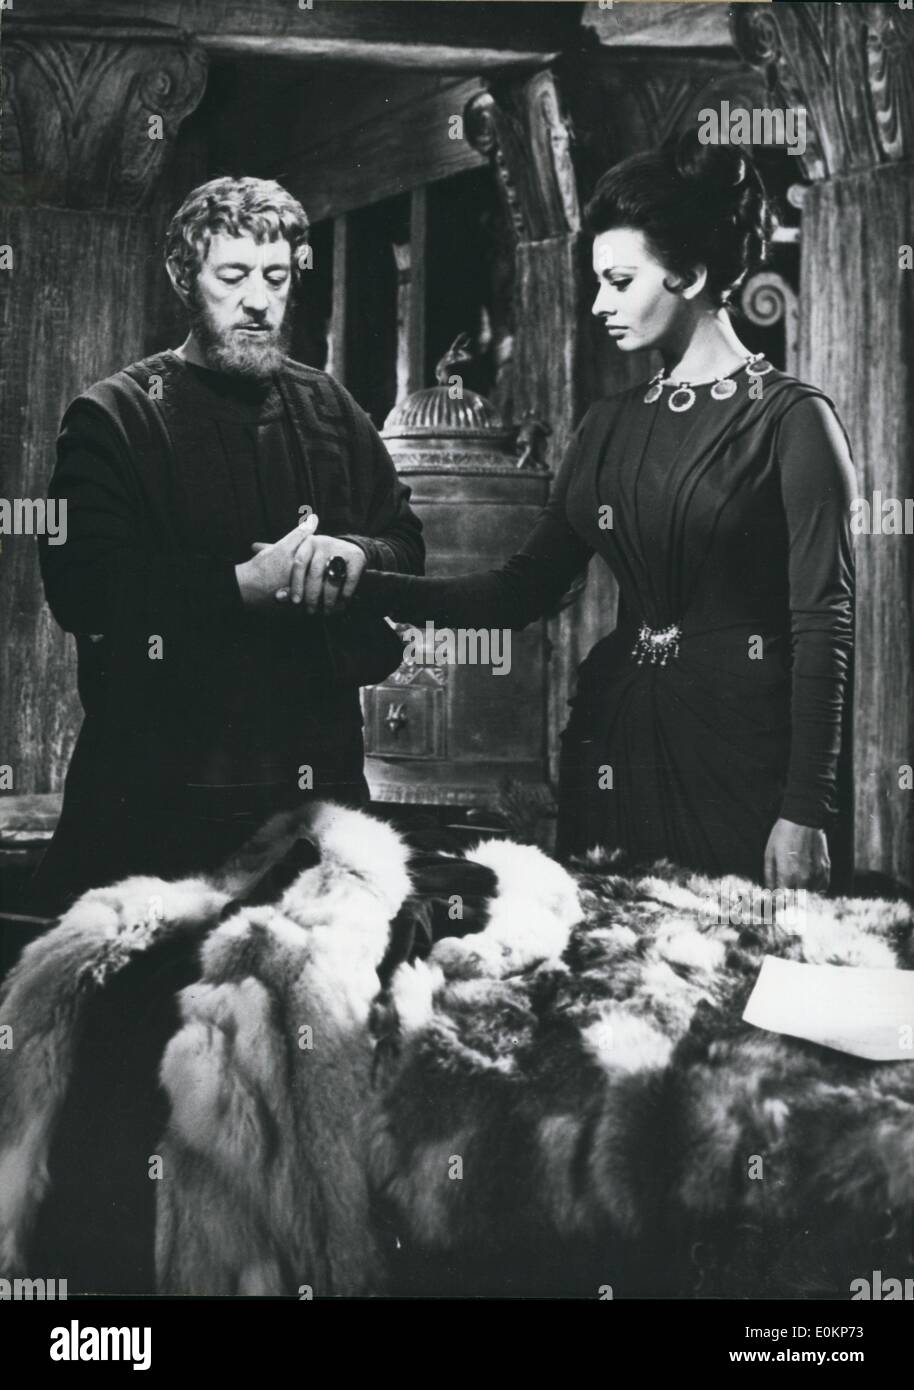 Mar. 03, 1943 - Sophia Loren and Alec Guinness Partners in ''The Fall of the Roman Empire'' : Near Madrid Anthony Mann is directing the Super-Production ''The Fall of the Roman Empire'' in which Sophia Loren plays Lucilla, Daughter of Emperor Marcus-Aurelius, played by Alec Guinness. Photo shows Alec Guinness and Sophia Loren in a scene of the Picture, ''(Illegible)'' Daughter that he wants Livius to ''(Illegible) Stock Photo